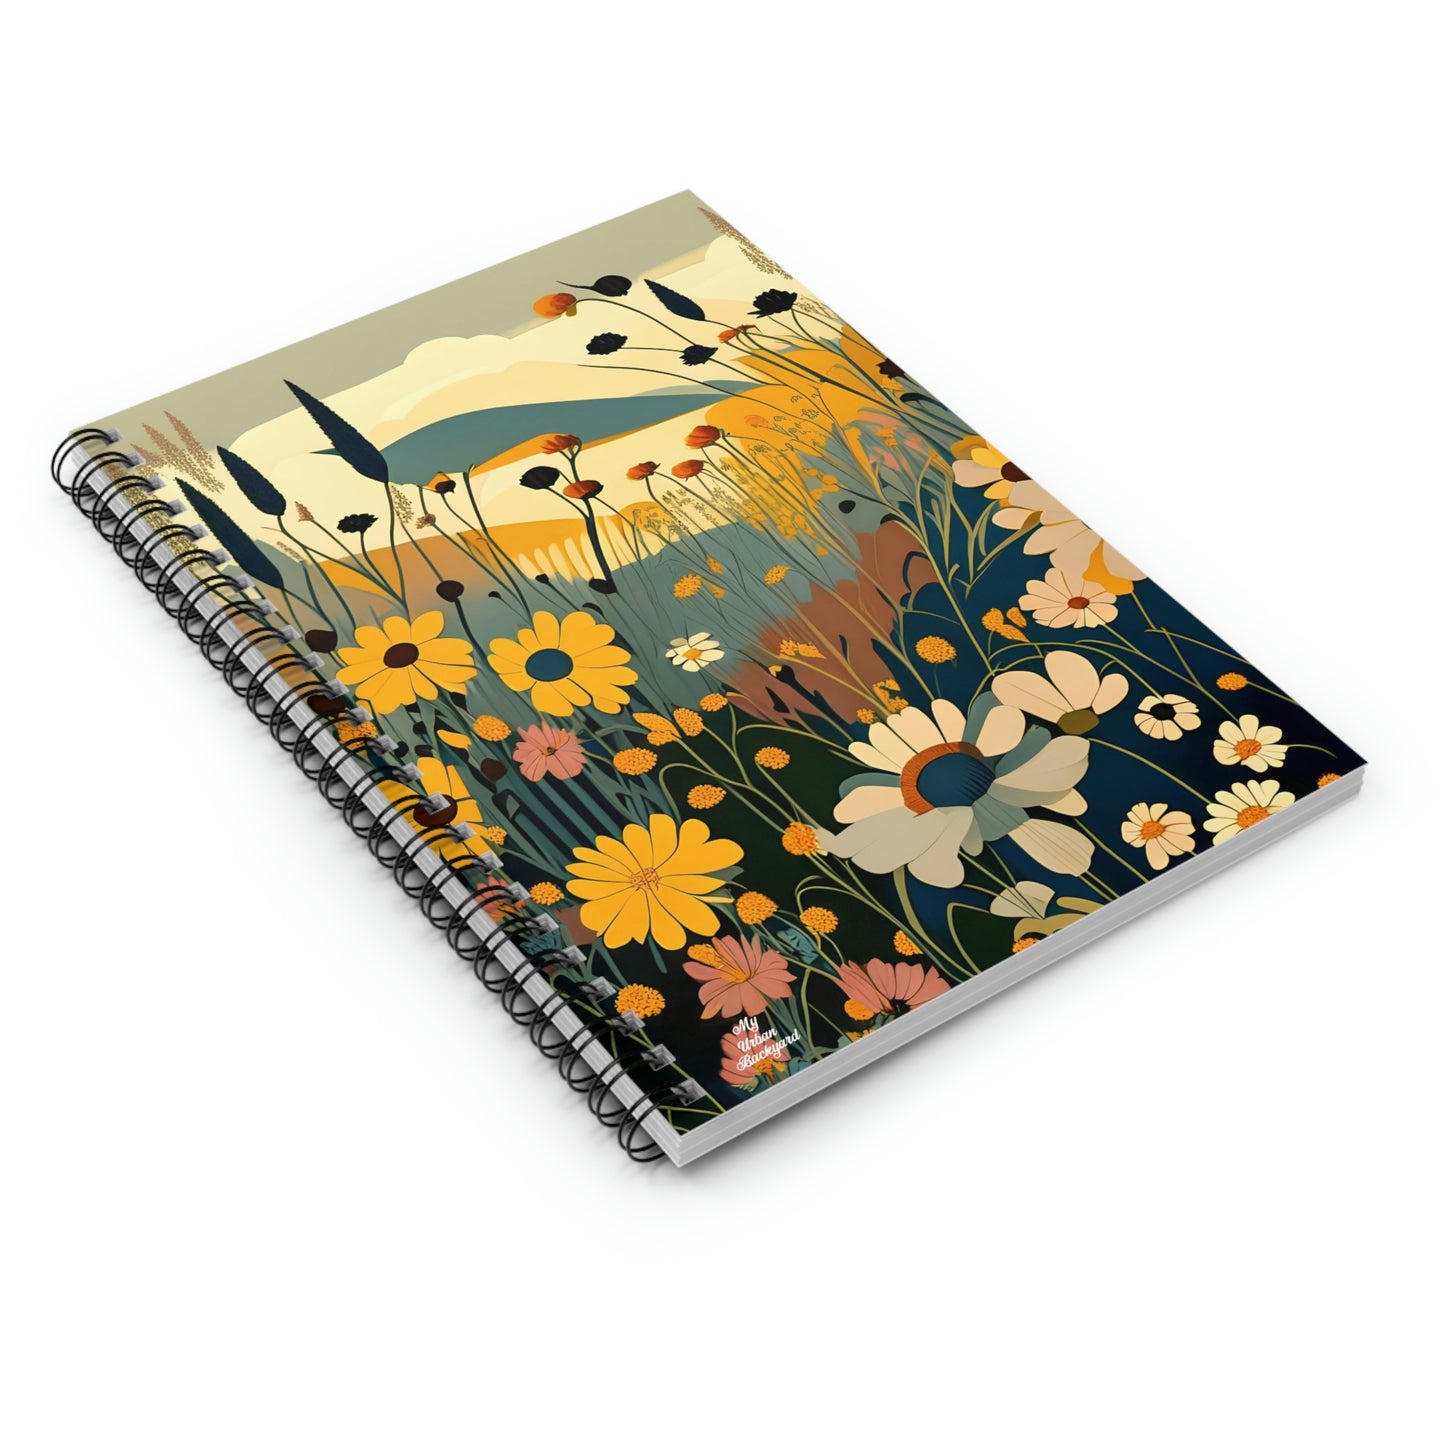 Spiral Notebook Writing Journal with 118 ruled line pages - Mountainside Wildflowers